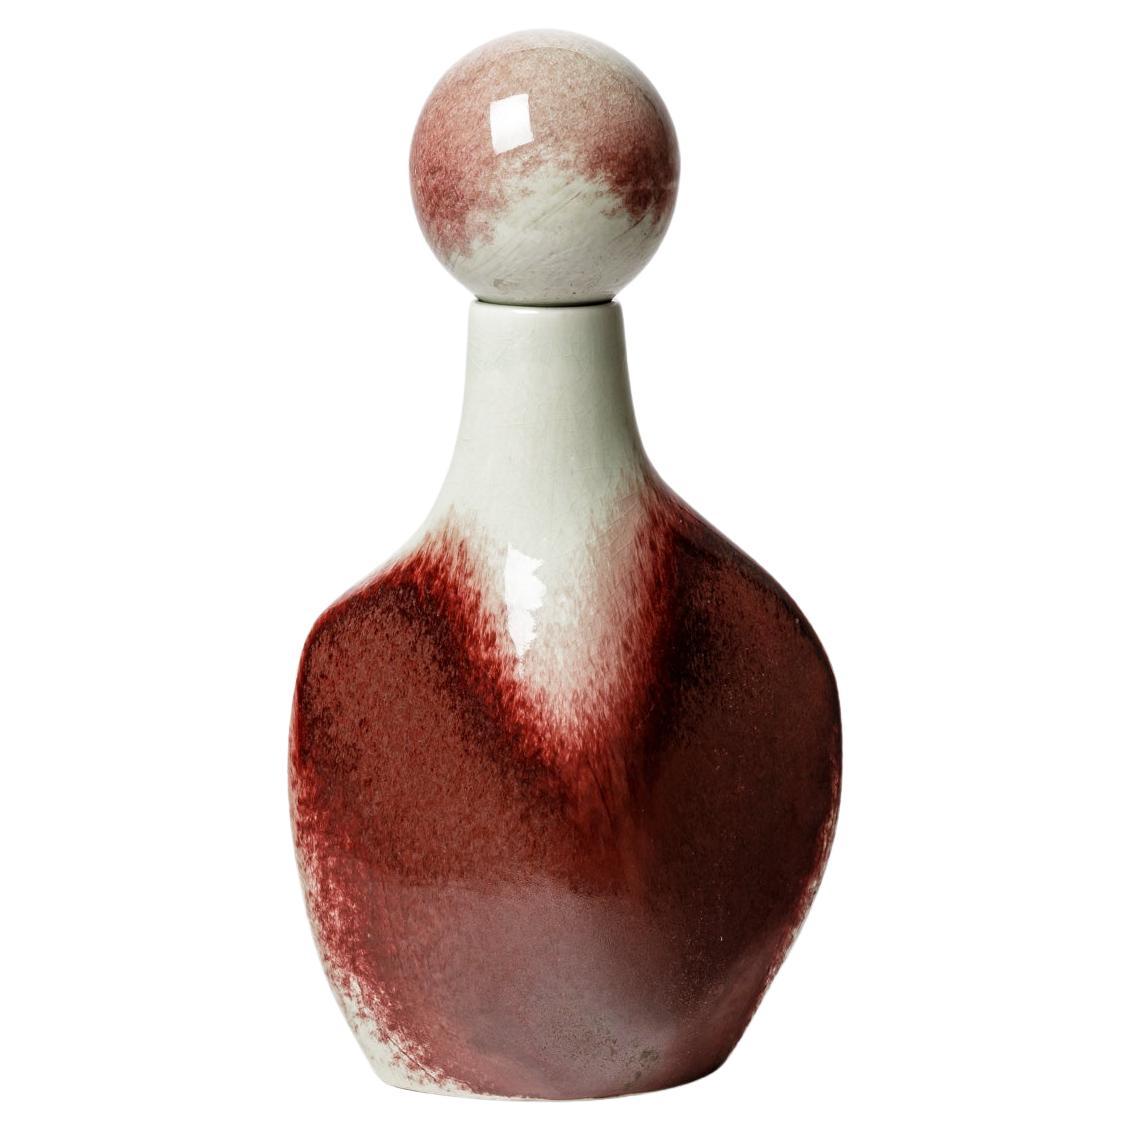 Red and white porcelain ceramic vase or bottle by Jacqueline and Tim Orr 1970 For Sale